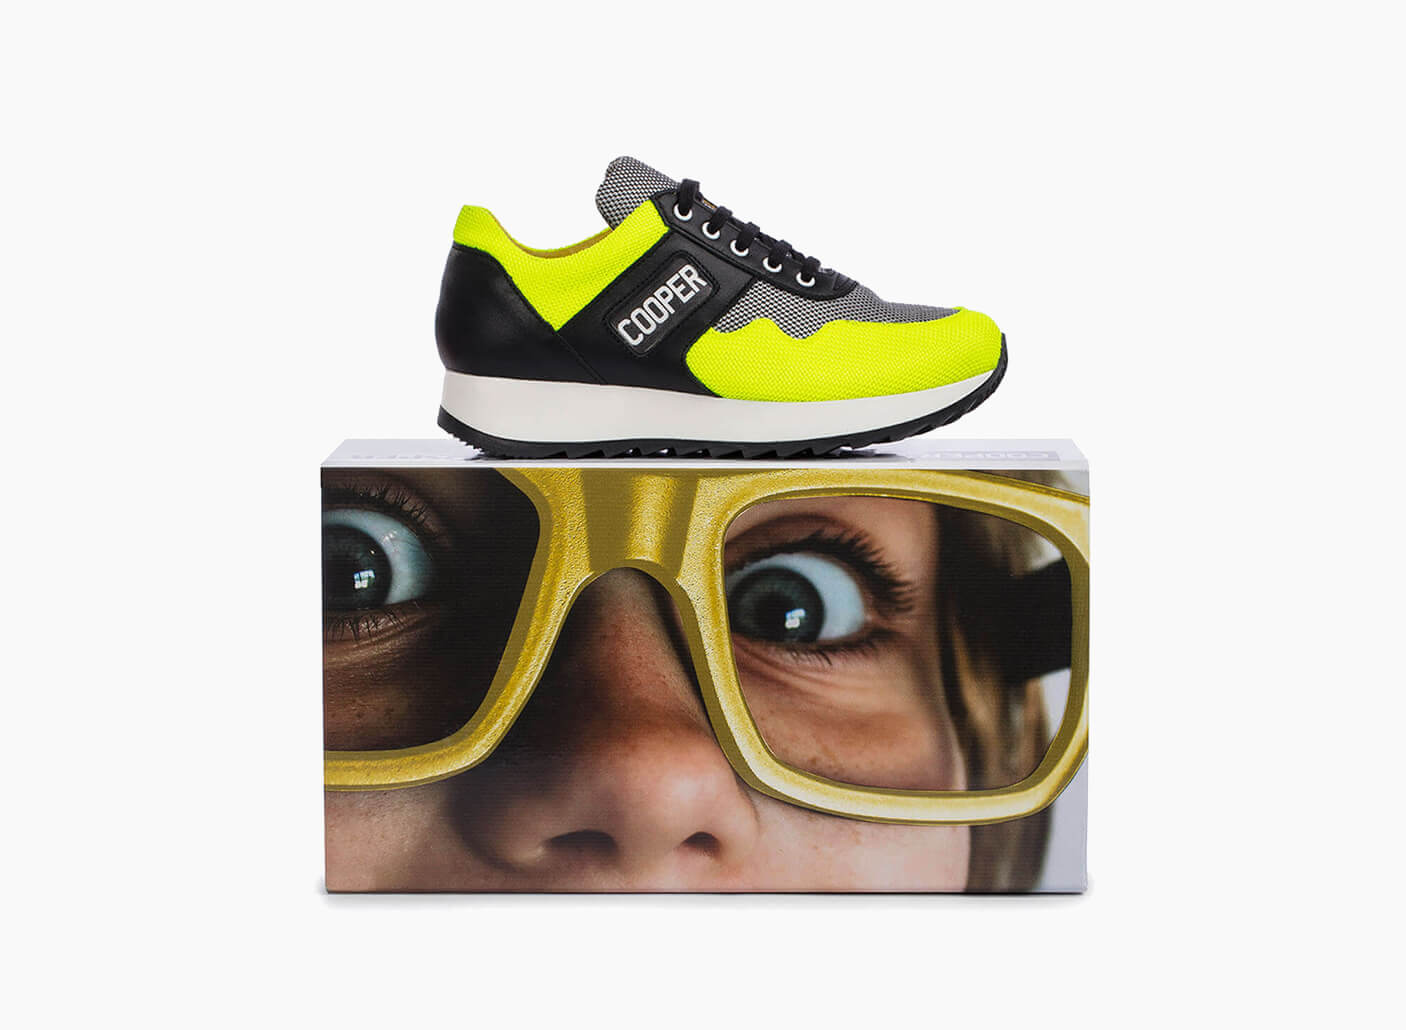 TOPKIDS customized made in Italy sneakers by James Barry